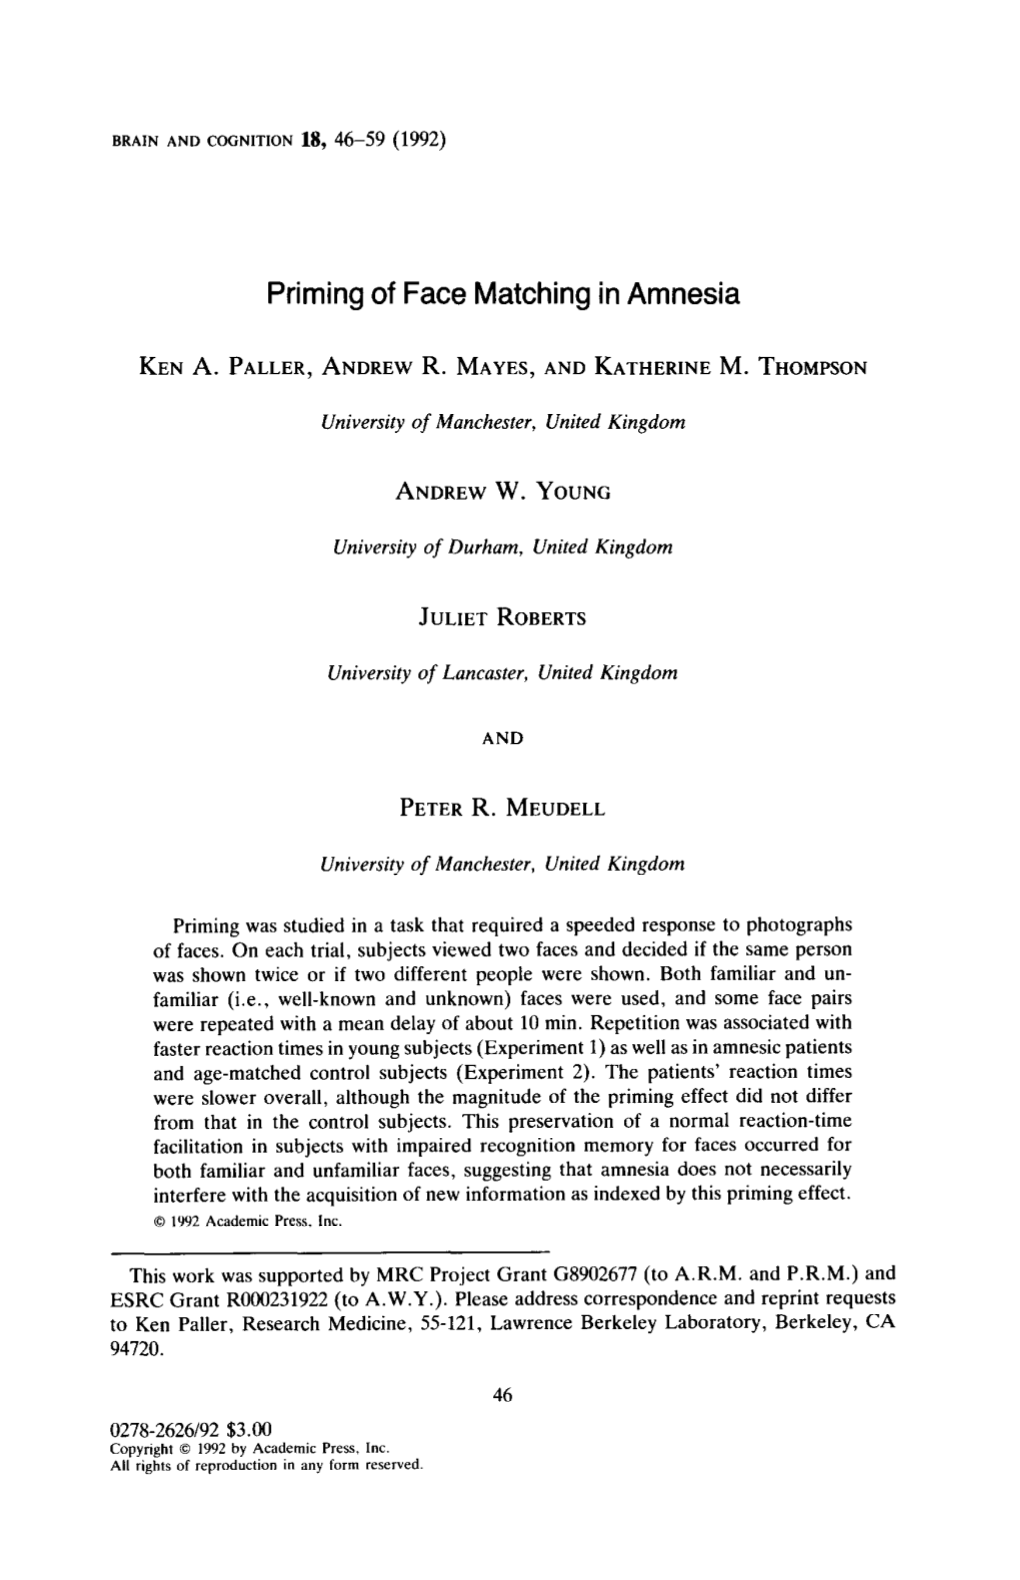 Priming of Face Matching in Amnesia